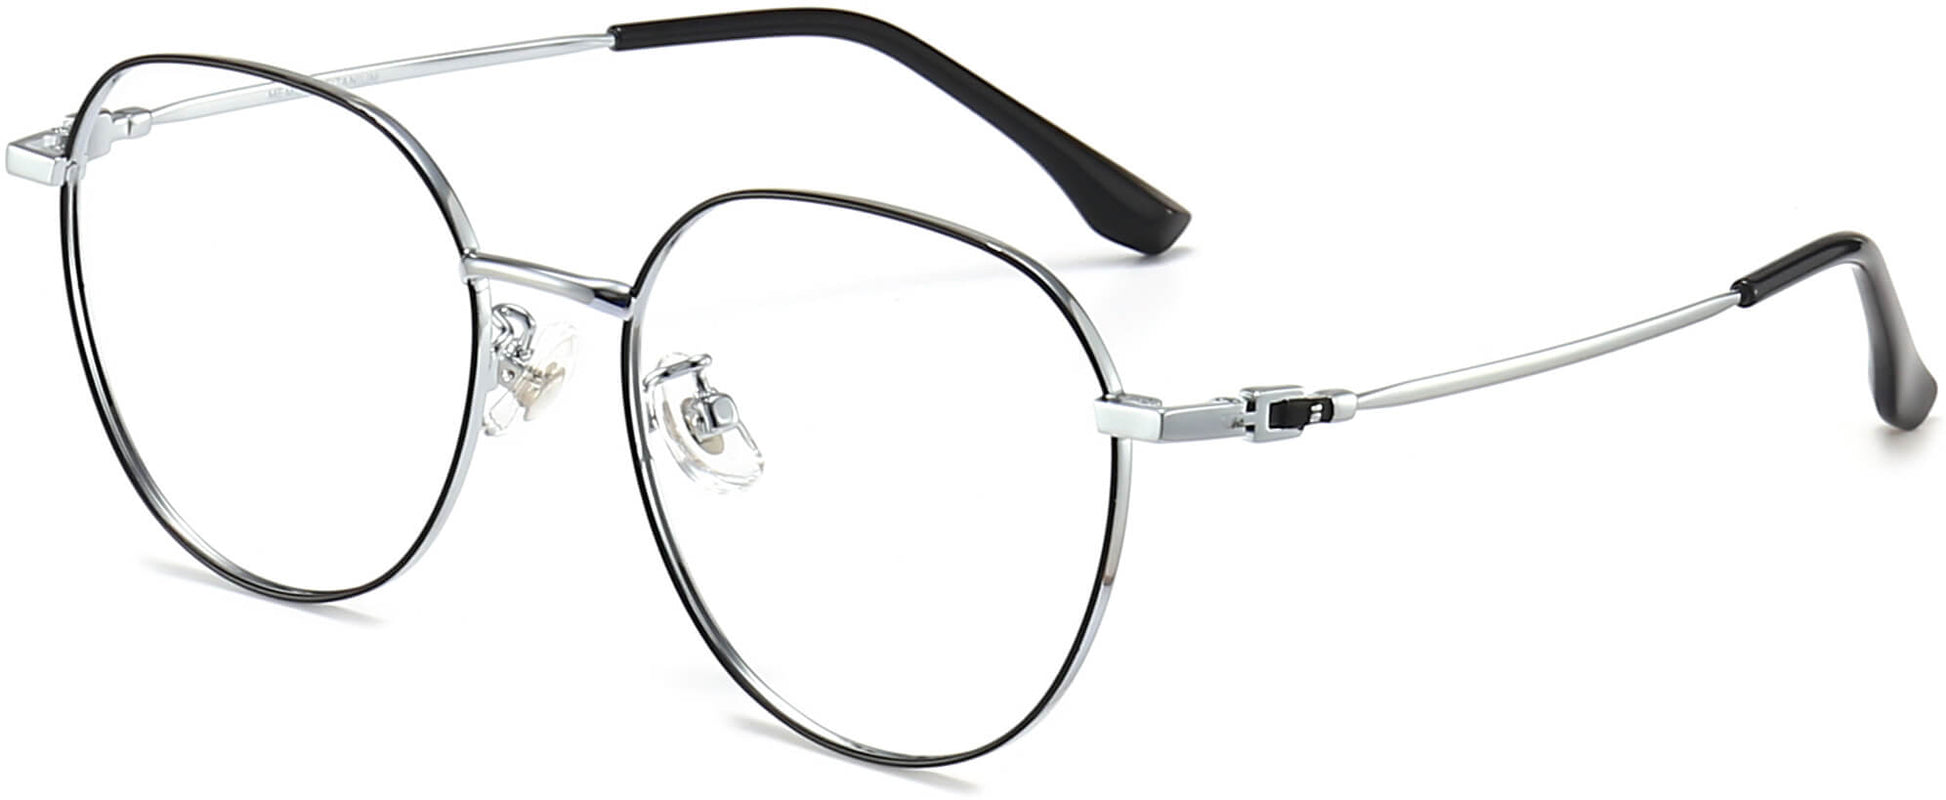 Ayaan Round Black Eyeglasses from ANRRI, angle view